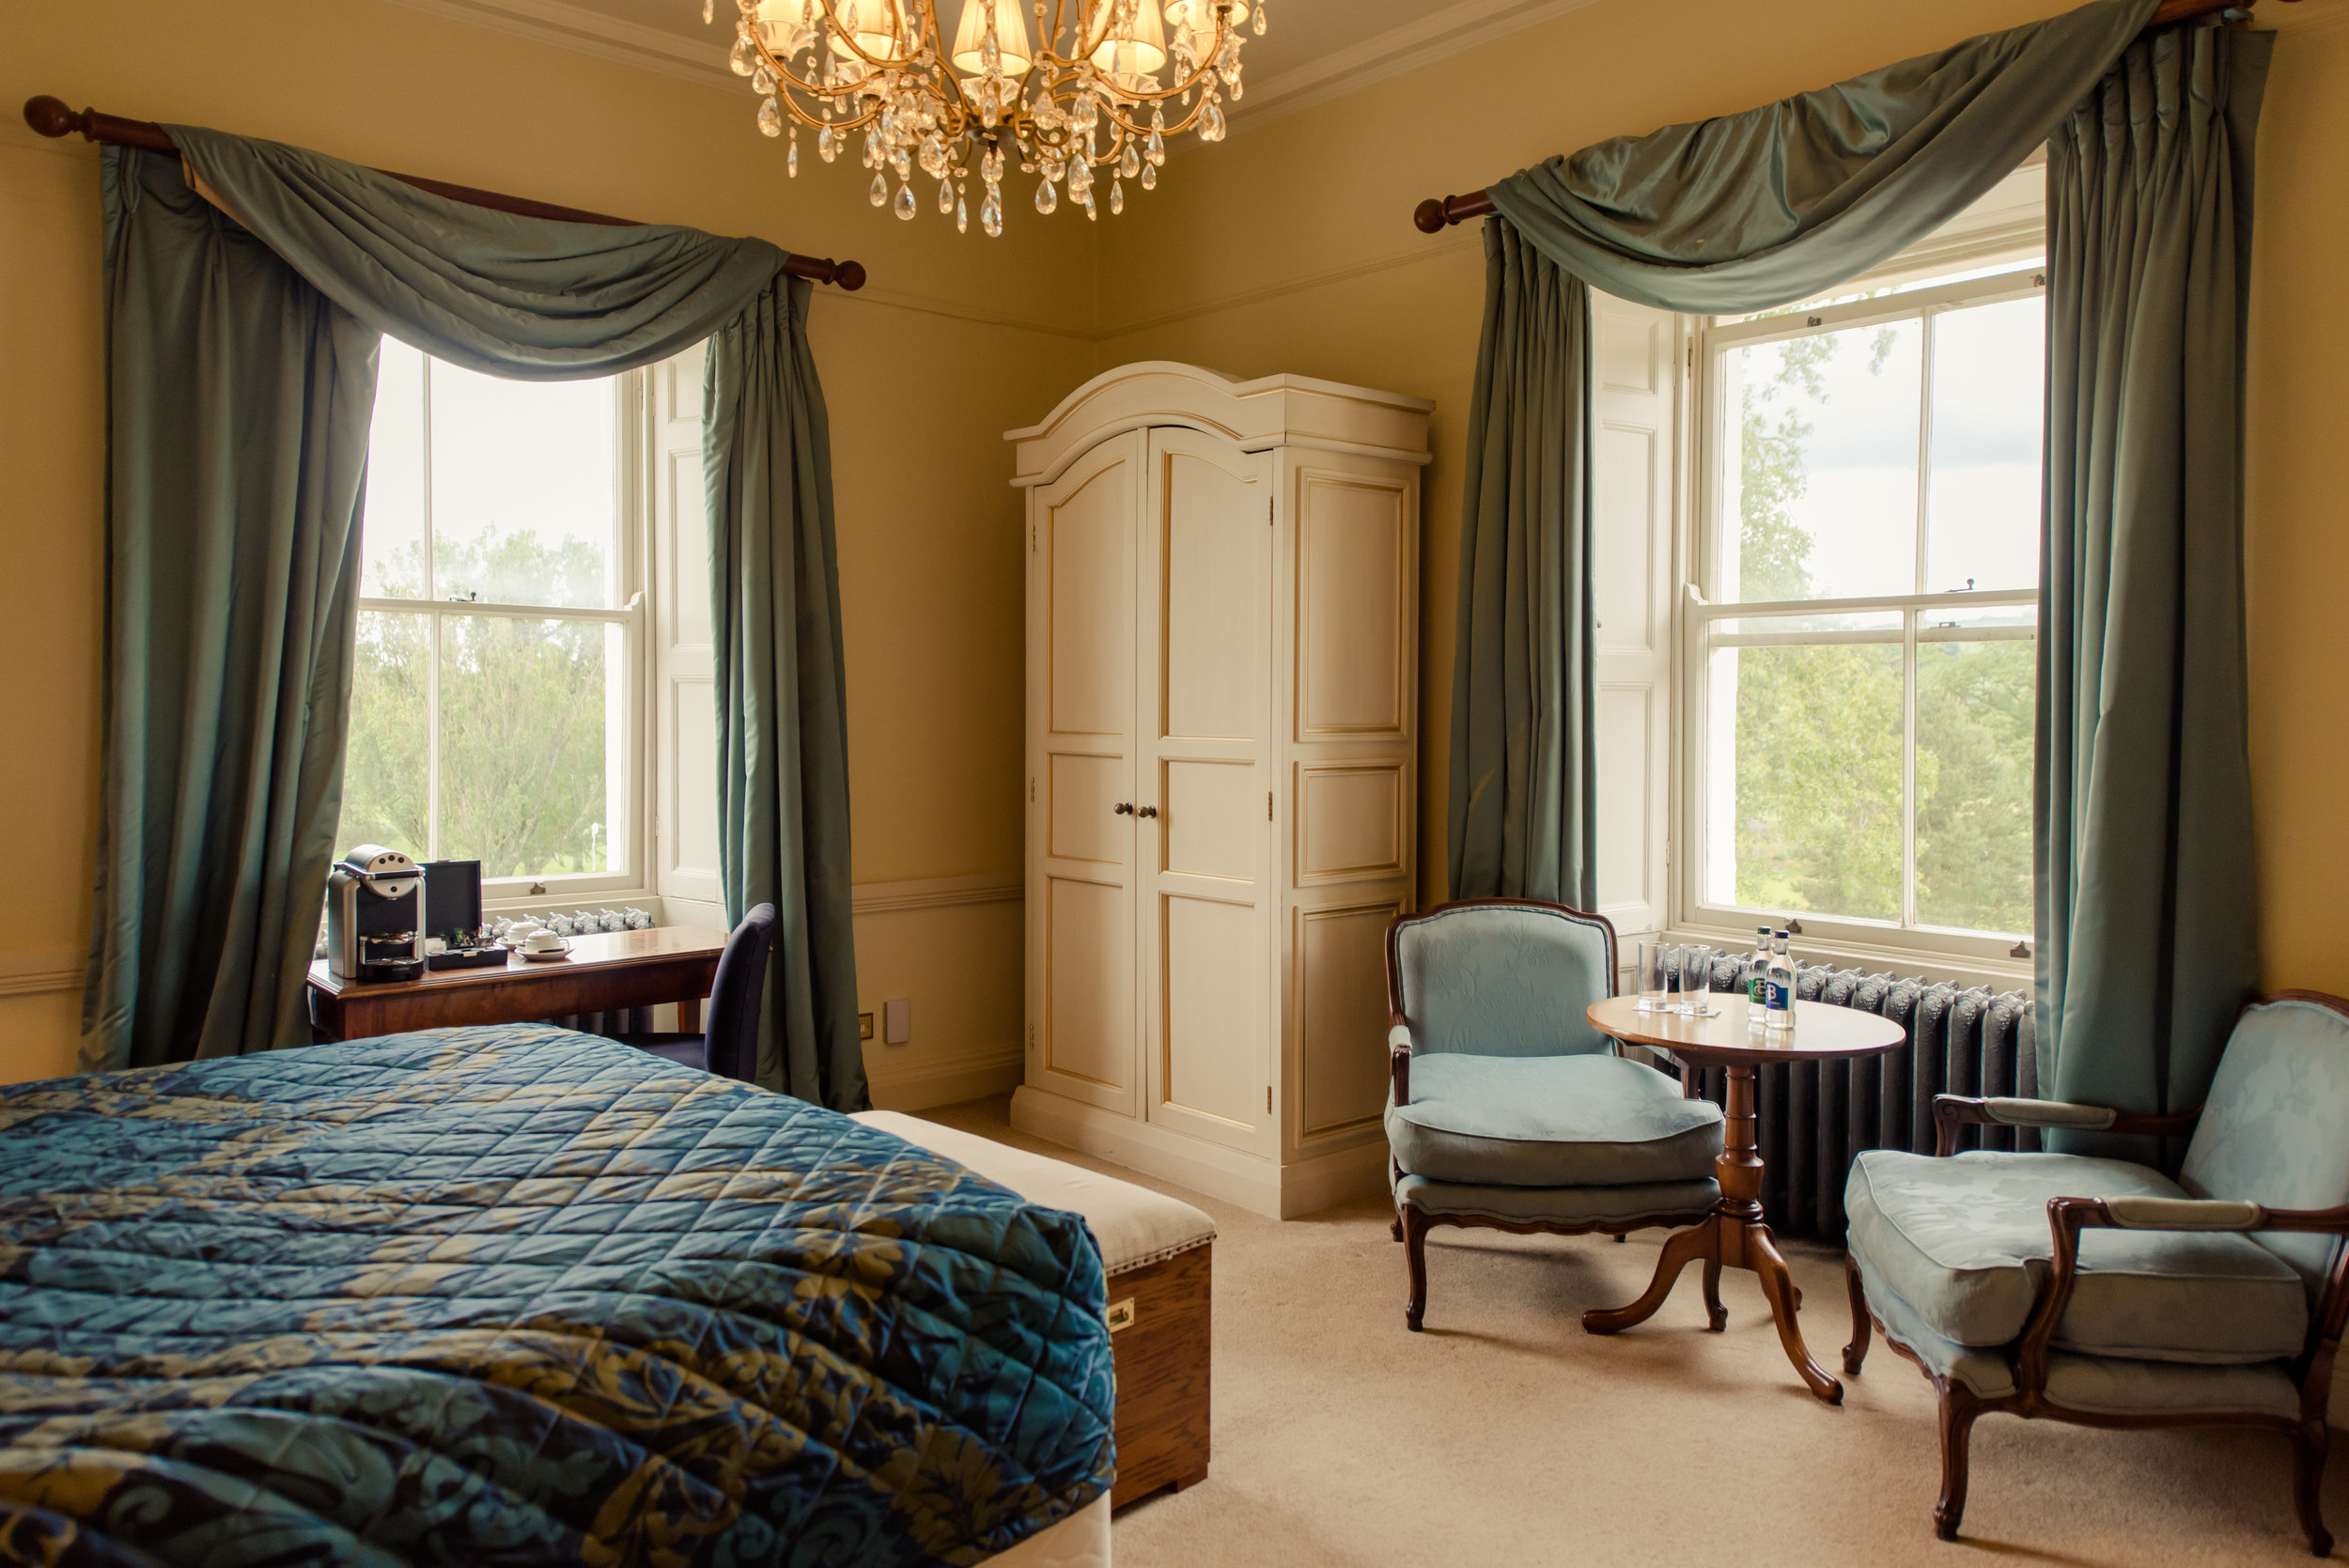 Tulfarris Hotel & Golf Resort Manor House bedroom with view out of two windows.jpg